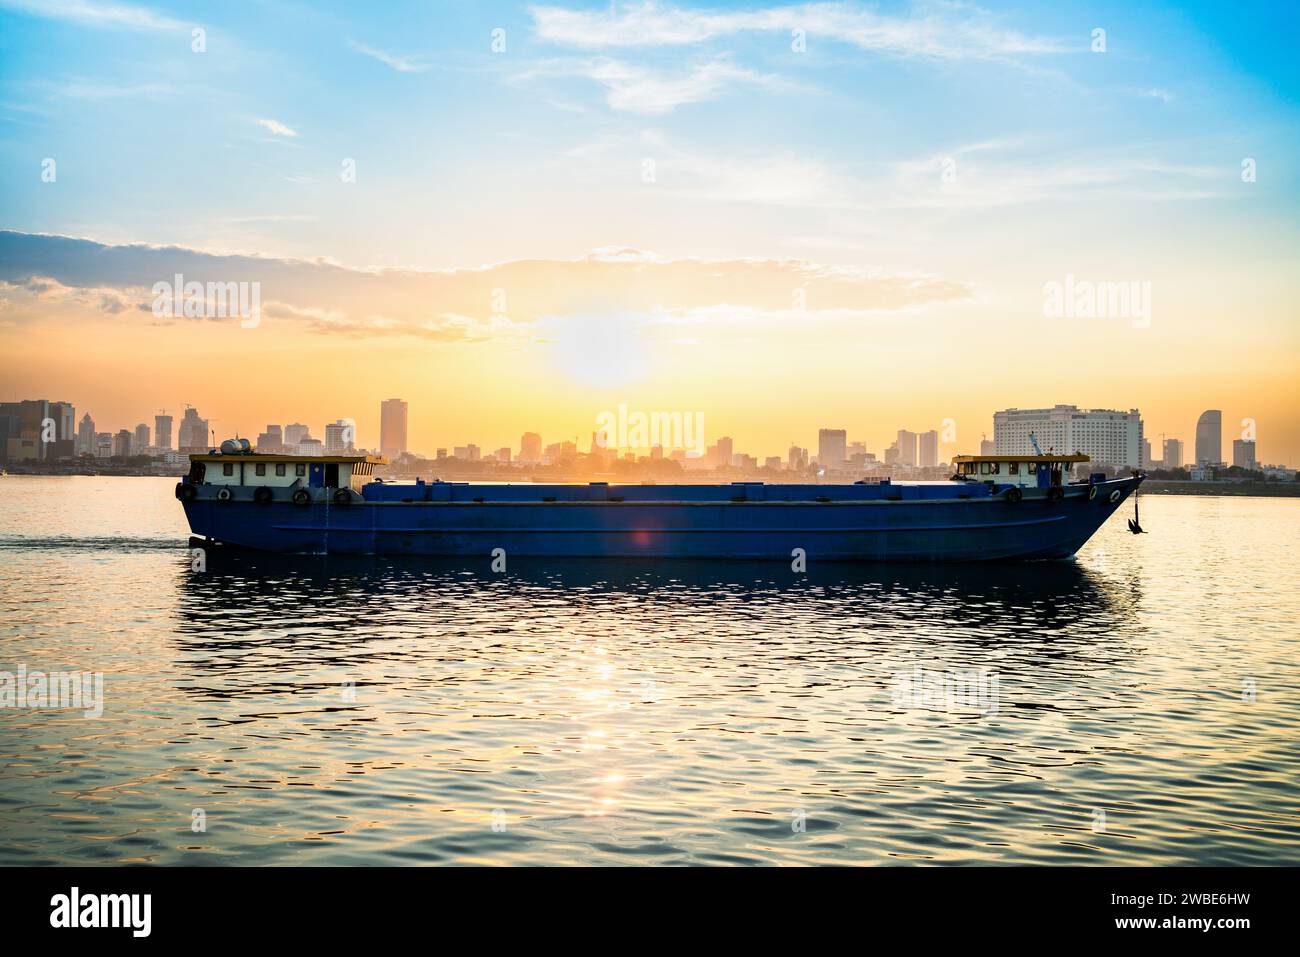 Cargo ship and dry bulk vessel at sunset. Export or import in Asia. Grain or wheat transportation. Phnom Penh city skyline in the background. Stock Photo